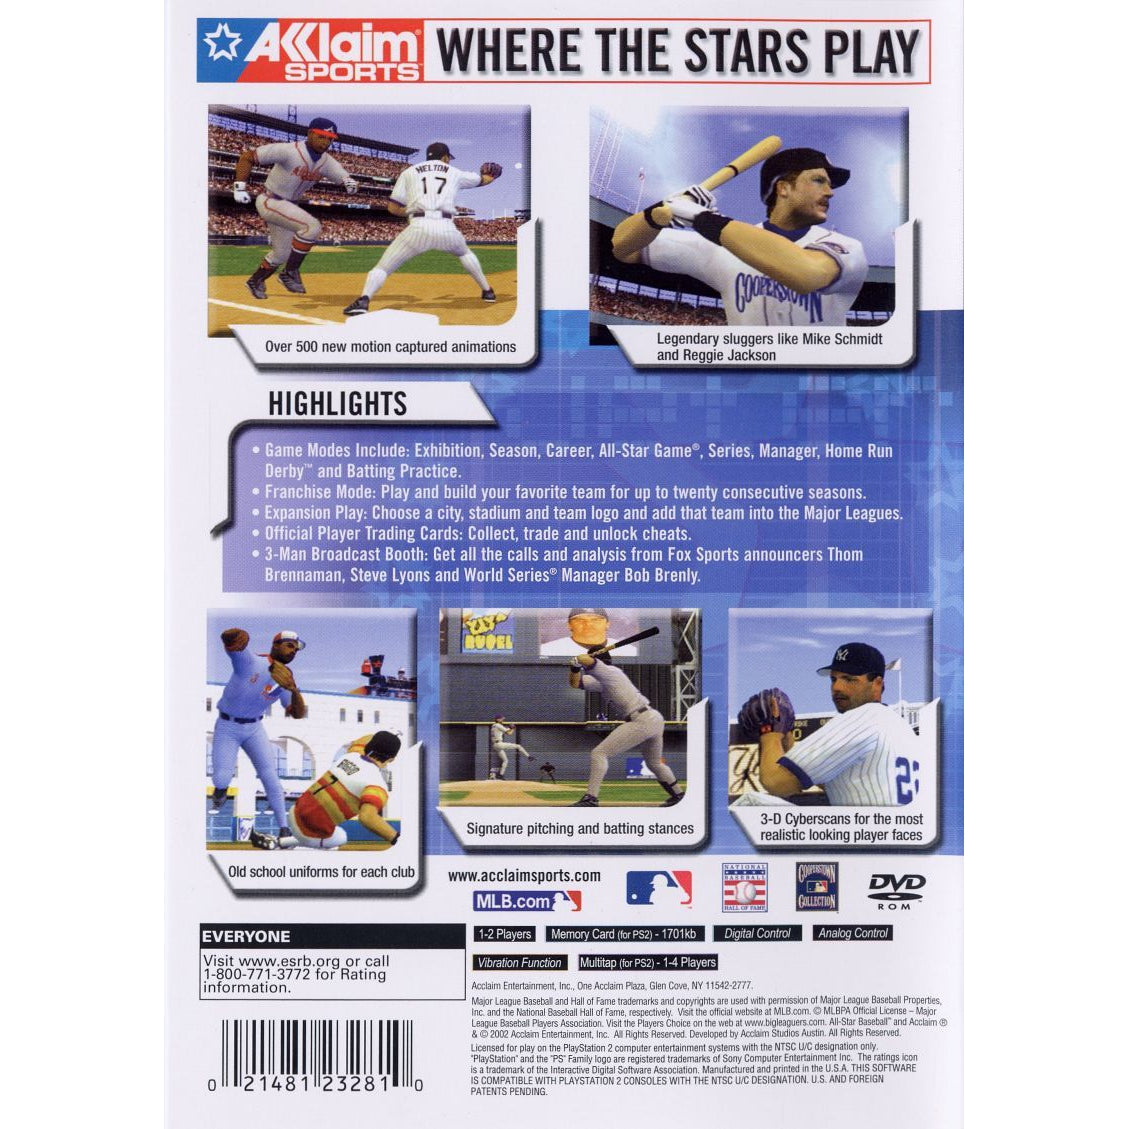 All-Star Baseball 2003 - PlayStation 2 (PS2) Game Complete - YourGamingShop.com - Buy, Sell, Trade Video Games Online. 120 Day Warranty. Satisfaction Guaranteed.